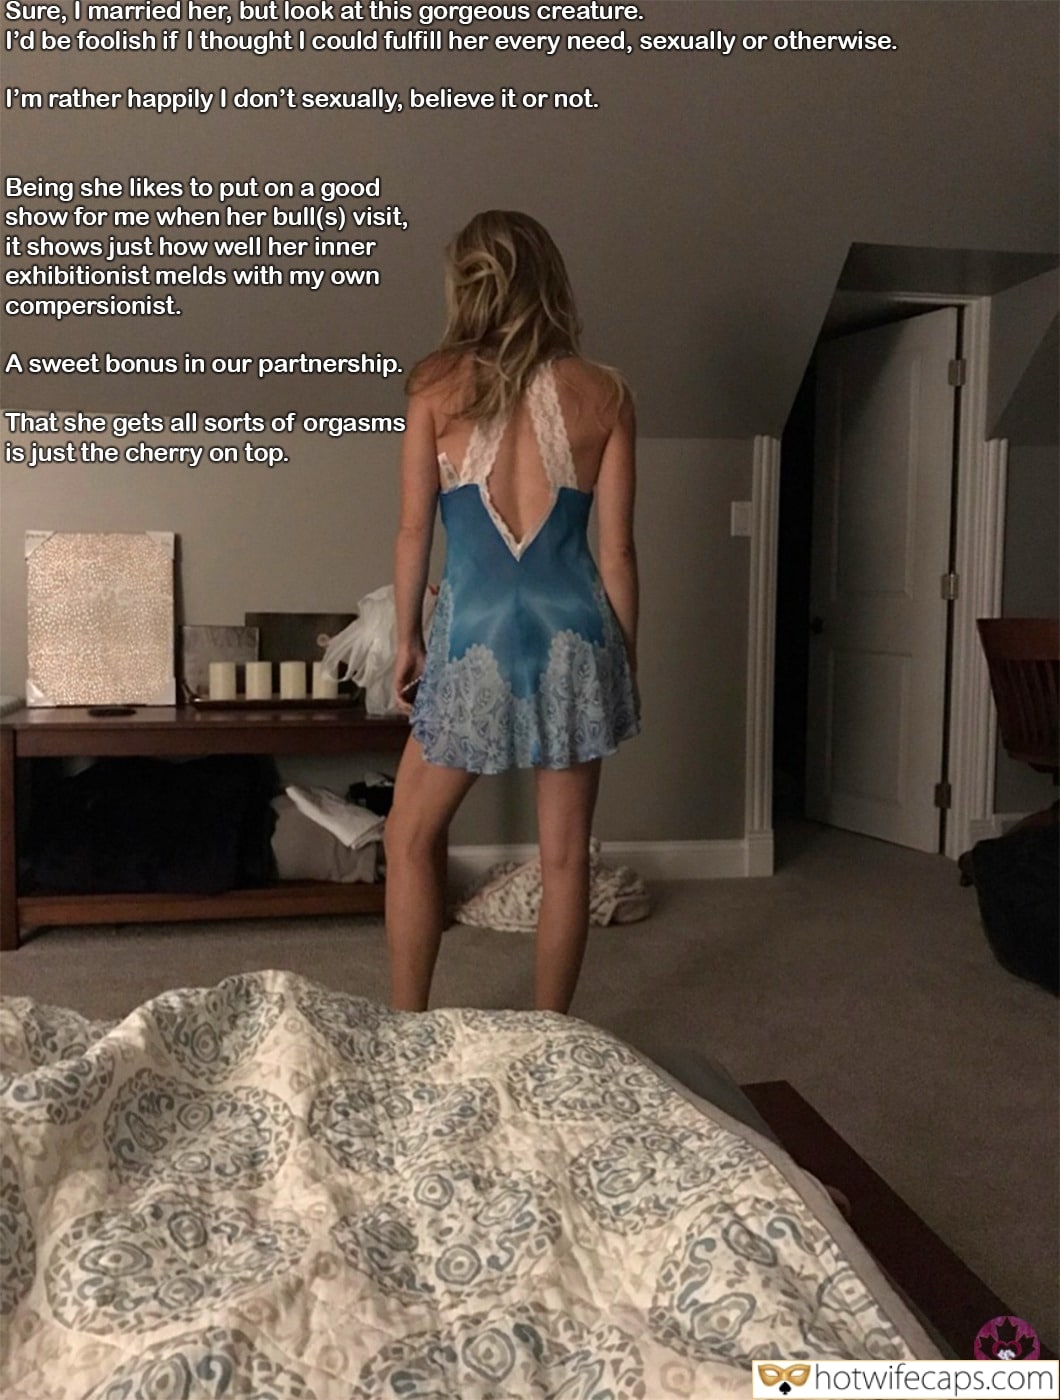 hotwife cuckold cuckold stories cheating captions cuckold bully cuckold bull hotwife caption home dress for meeting guests